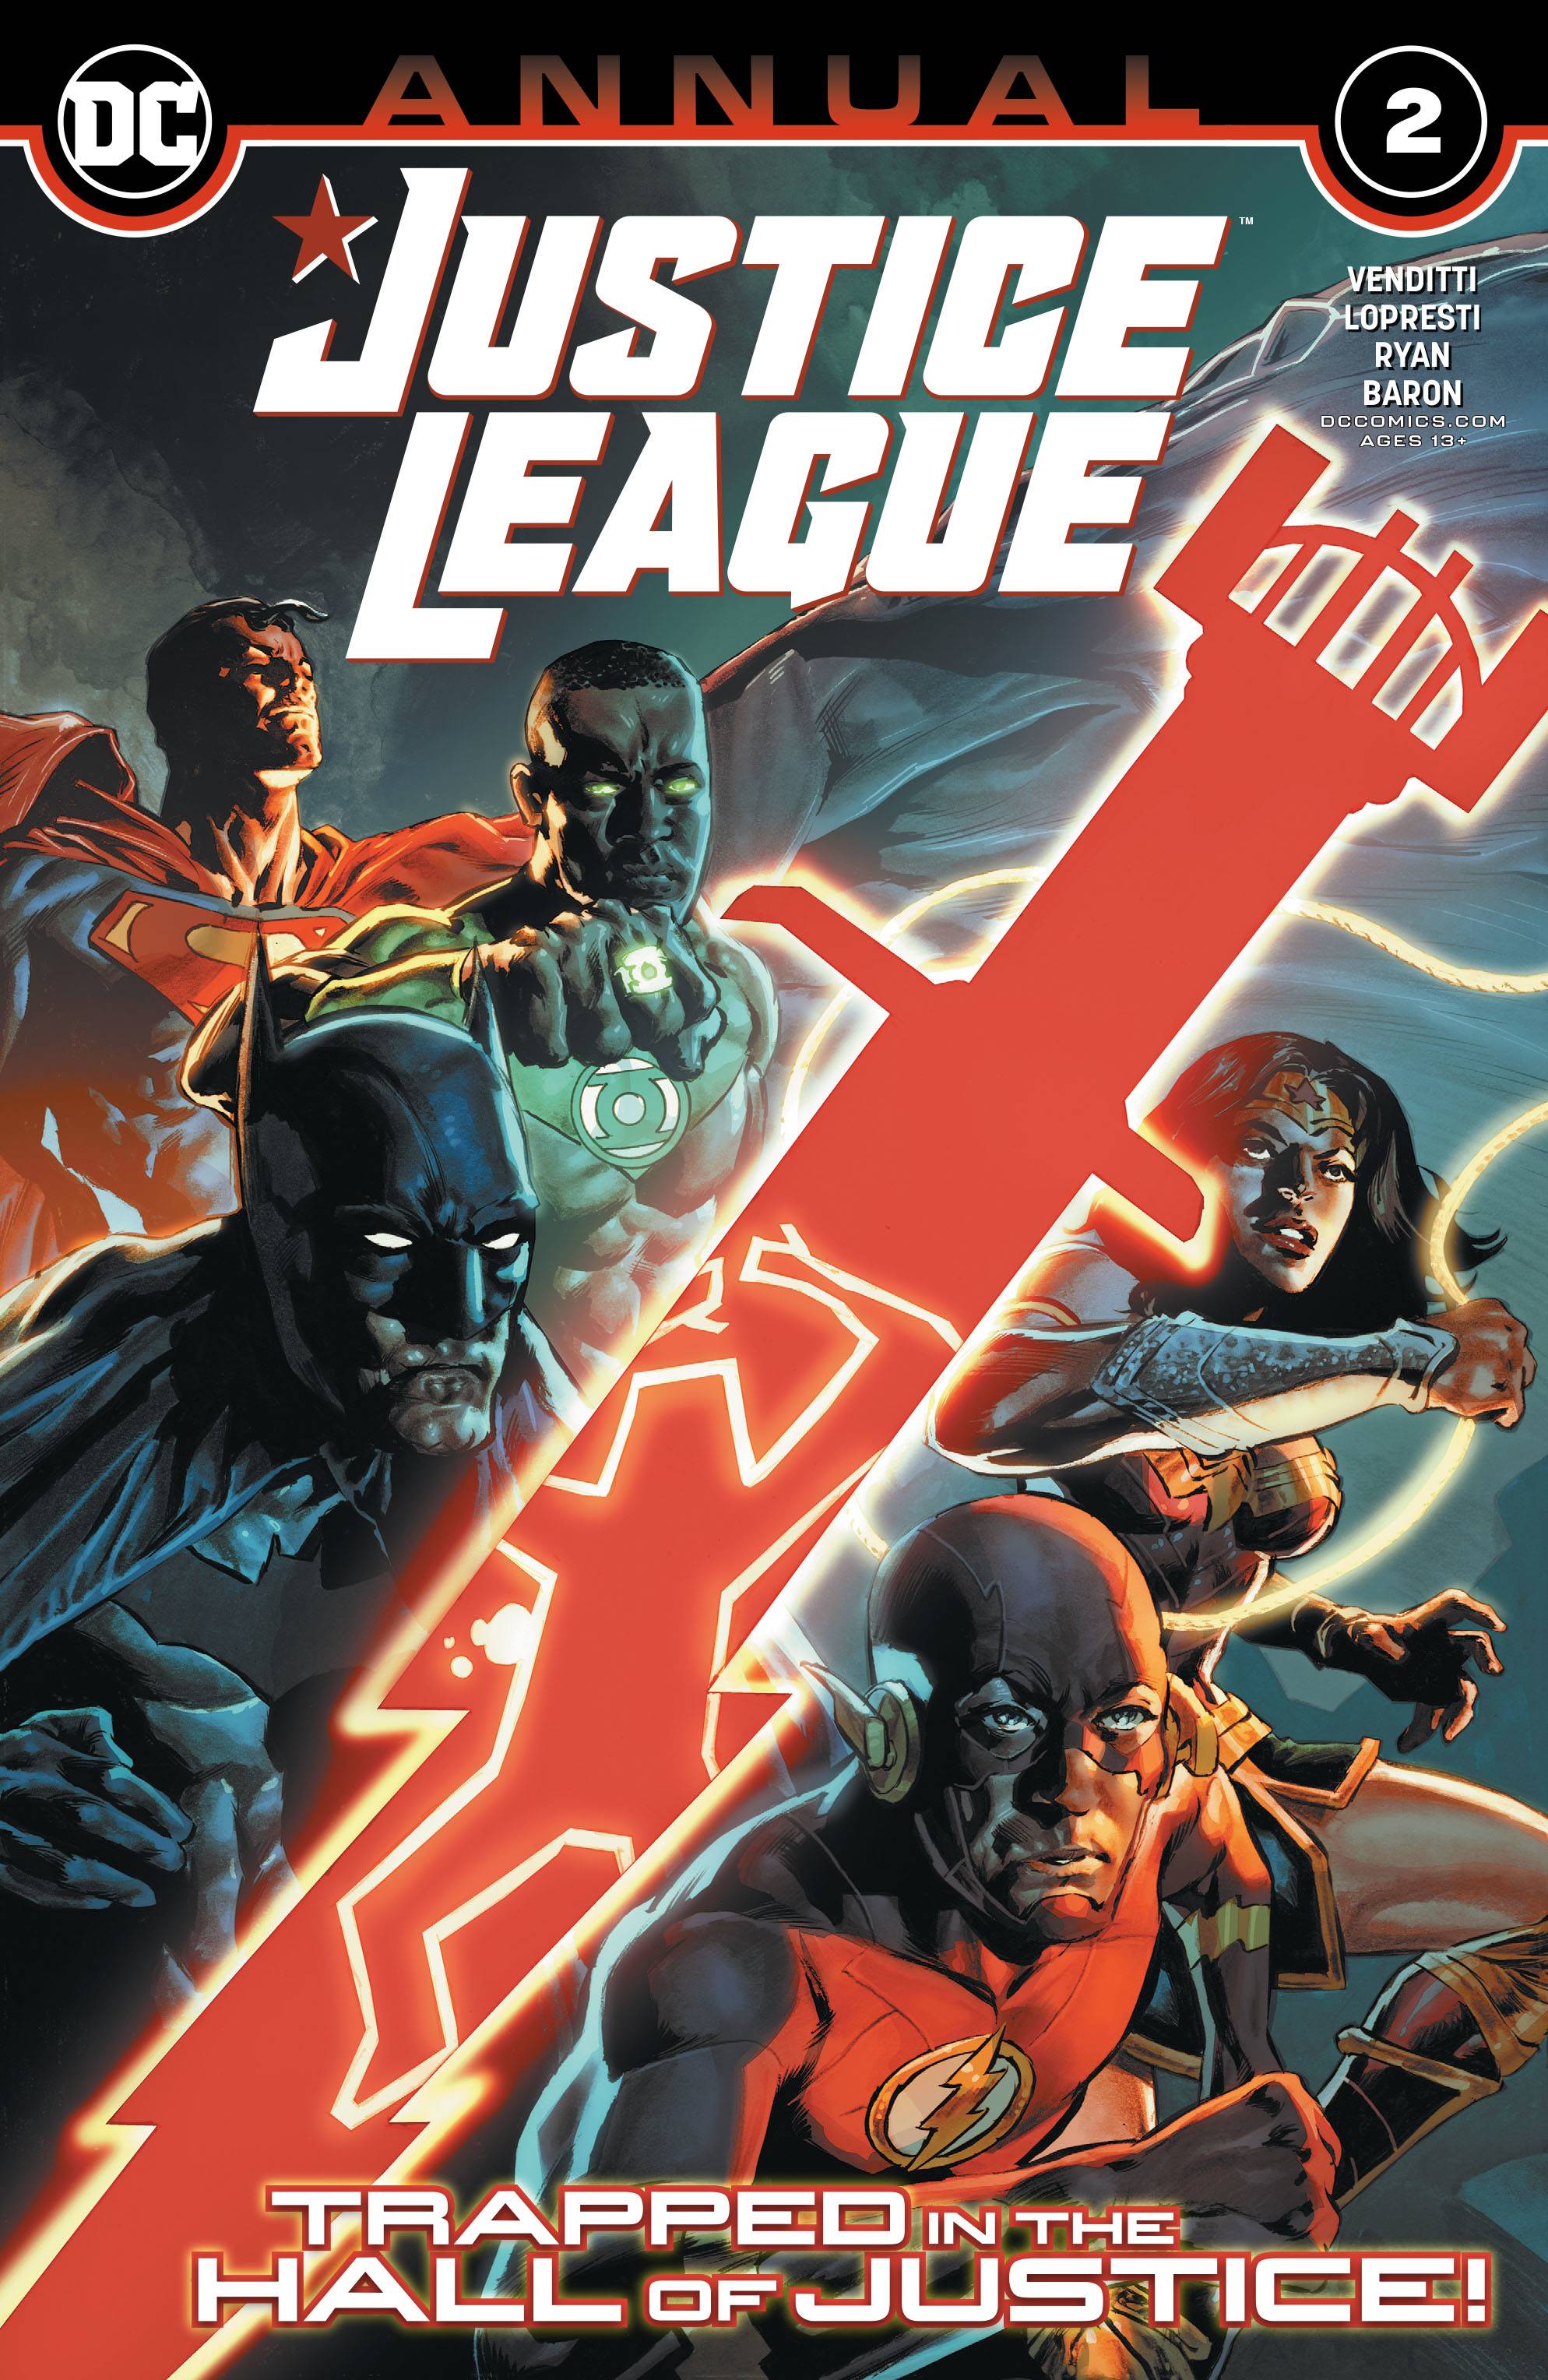 JUSTICE LEAGUE ANNUAL #2 | Game Master's Emporium (The New GME)